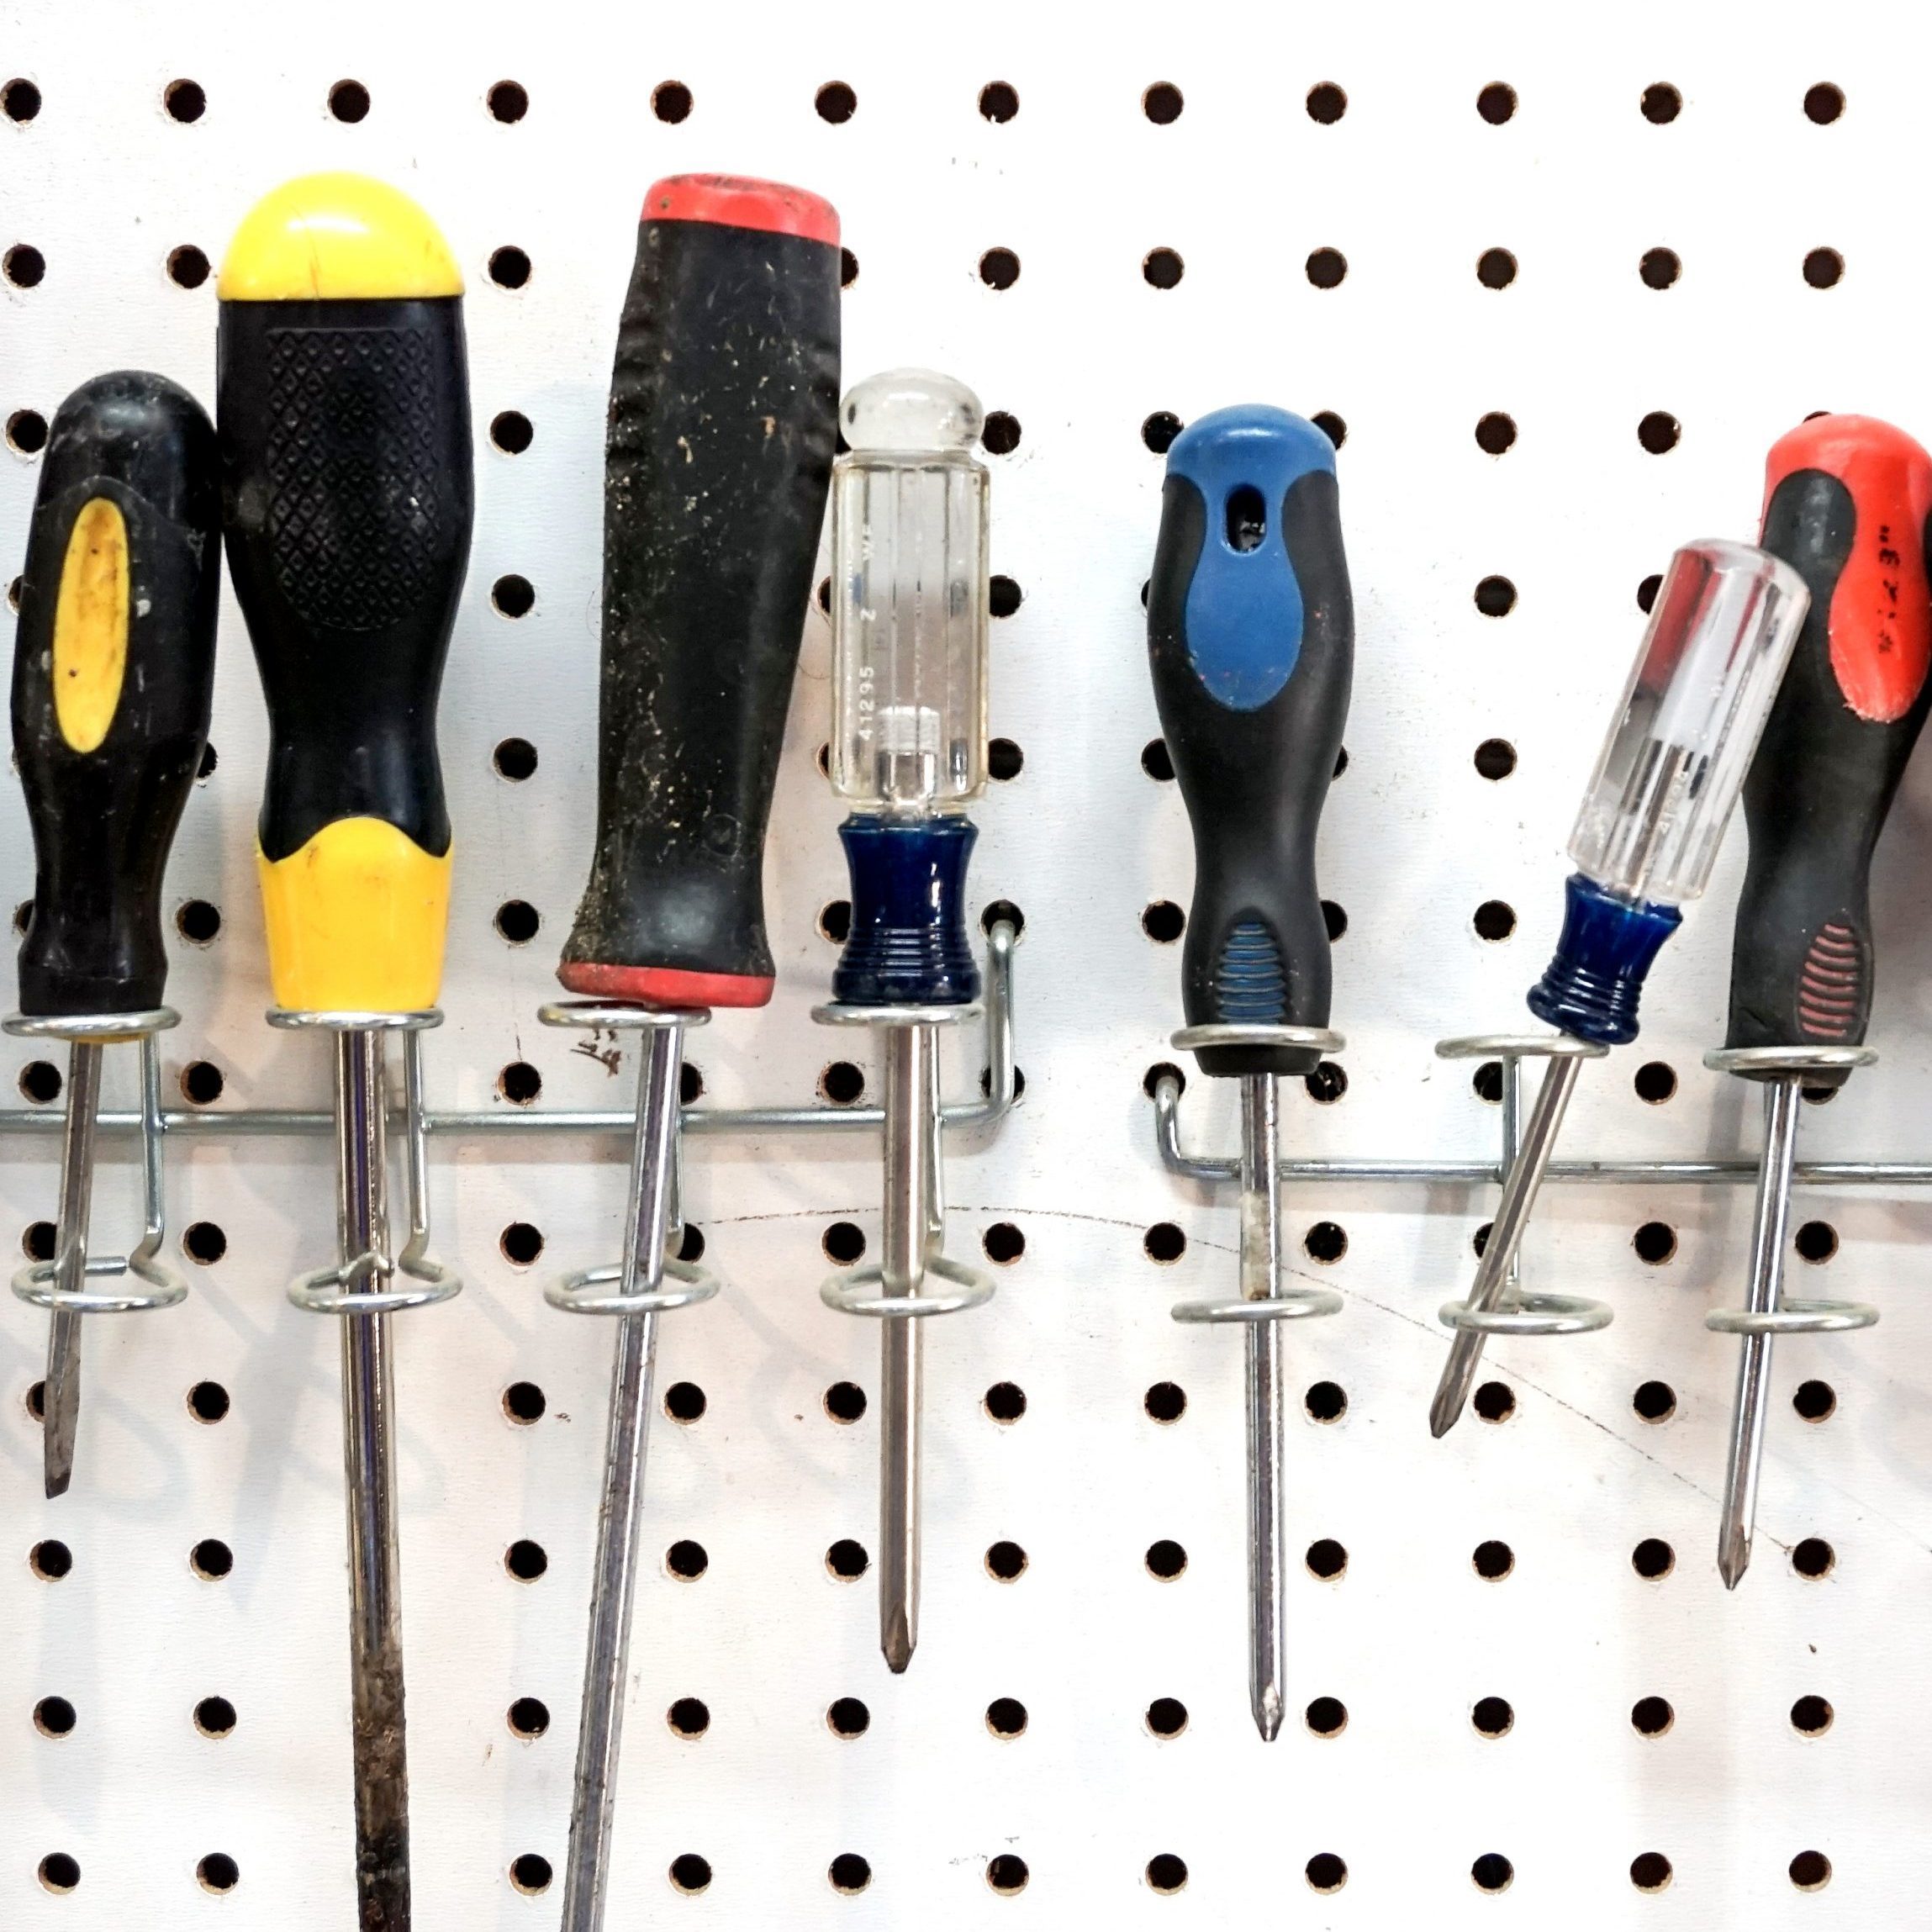 10 Screwdriver Types You Need in Your Toolbox